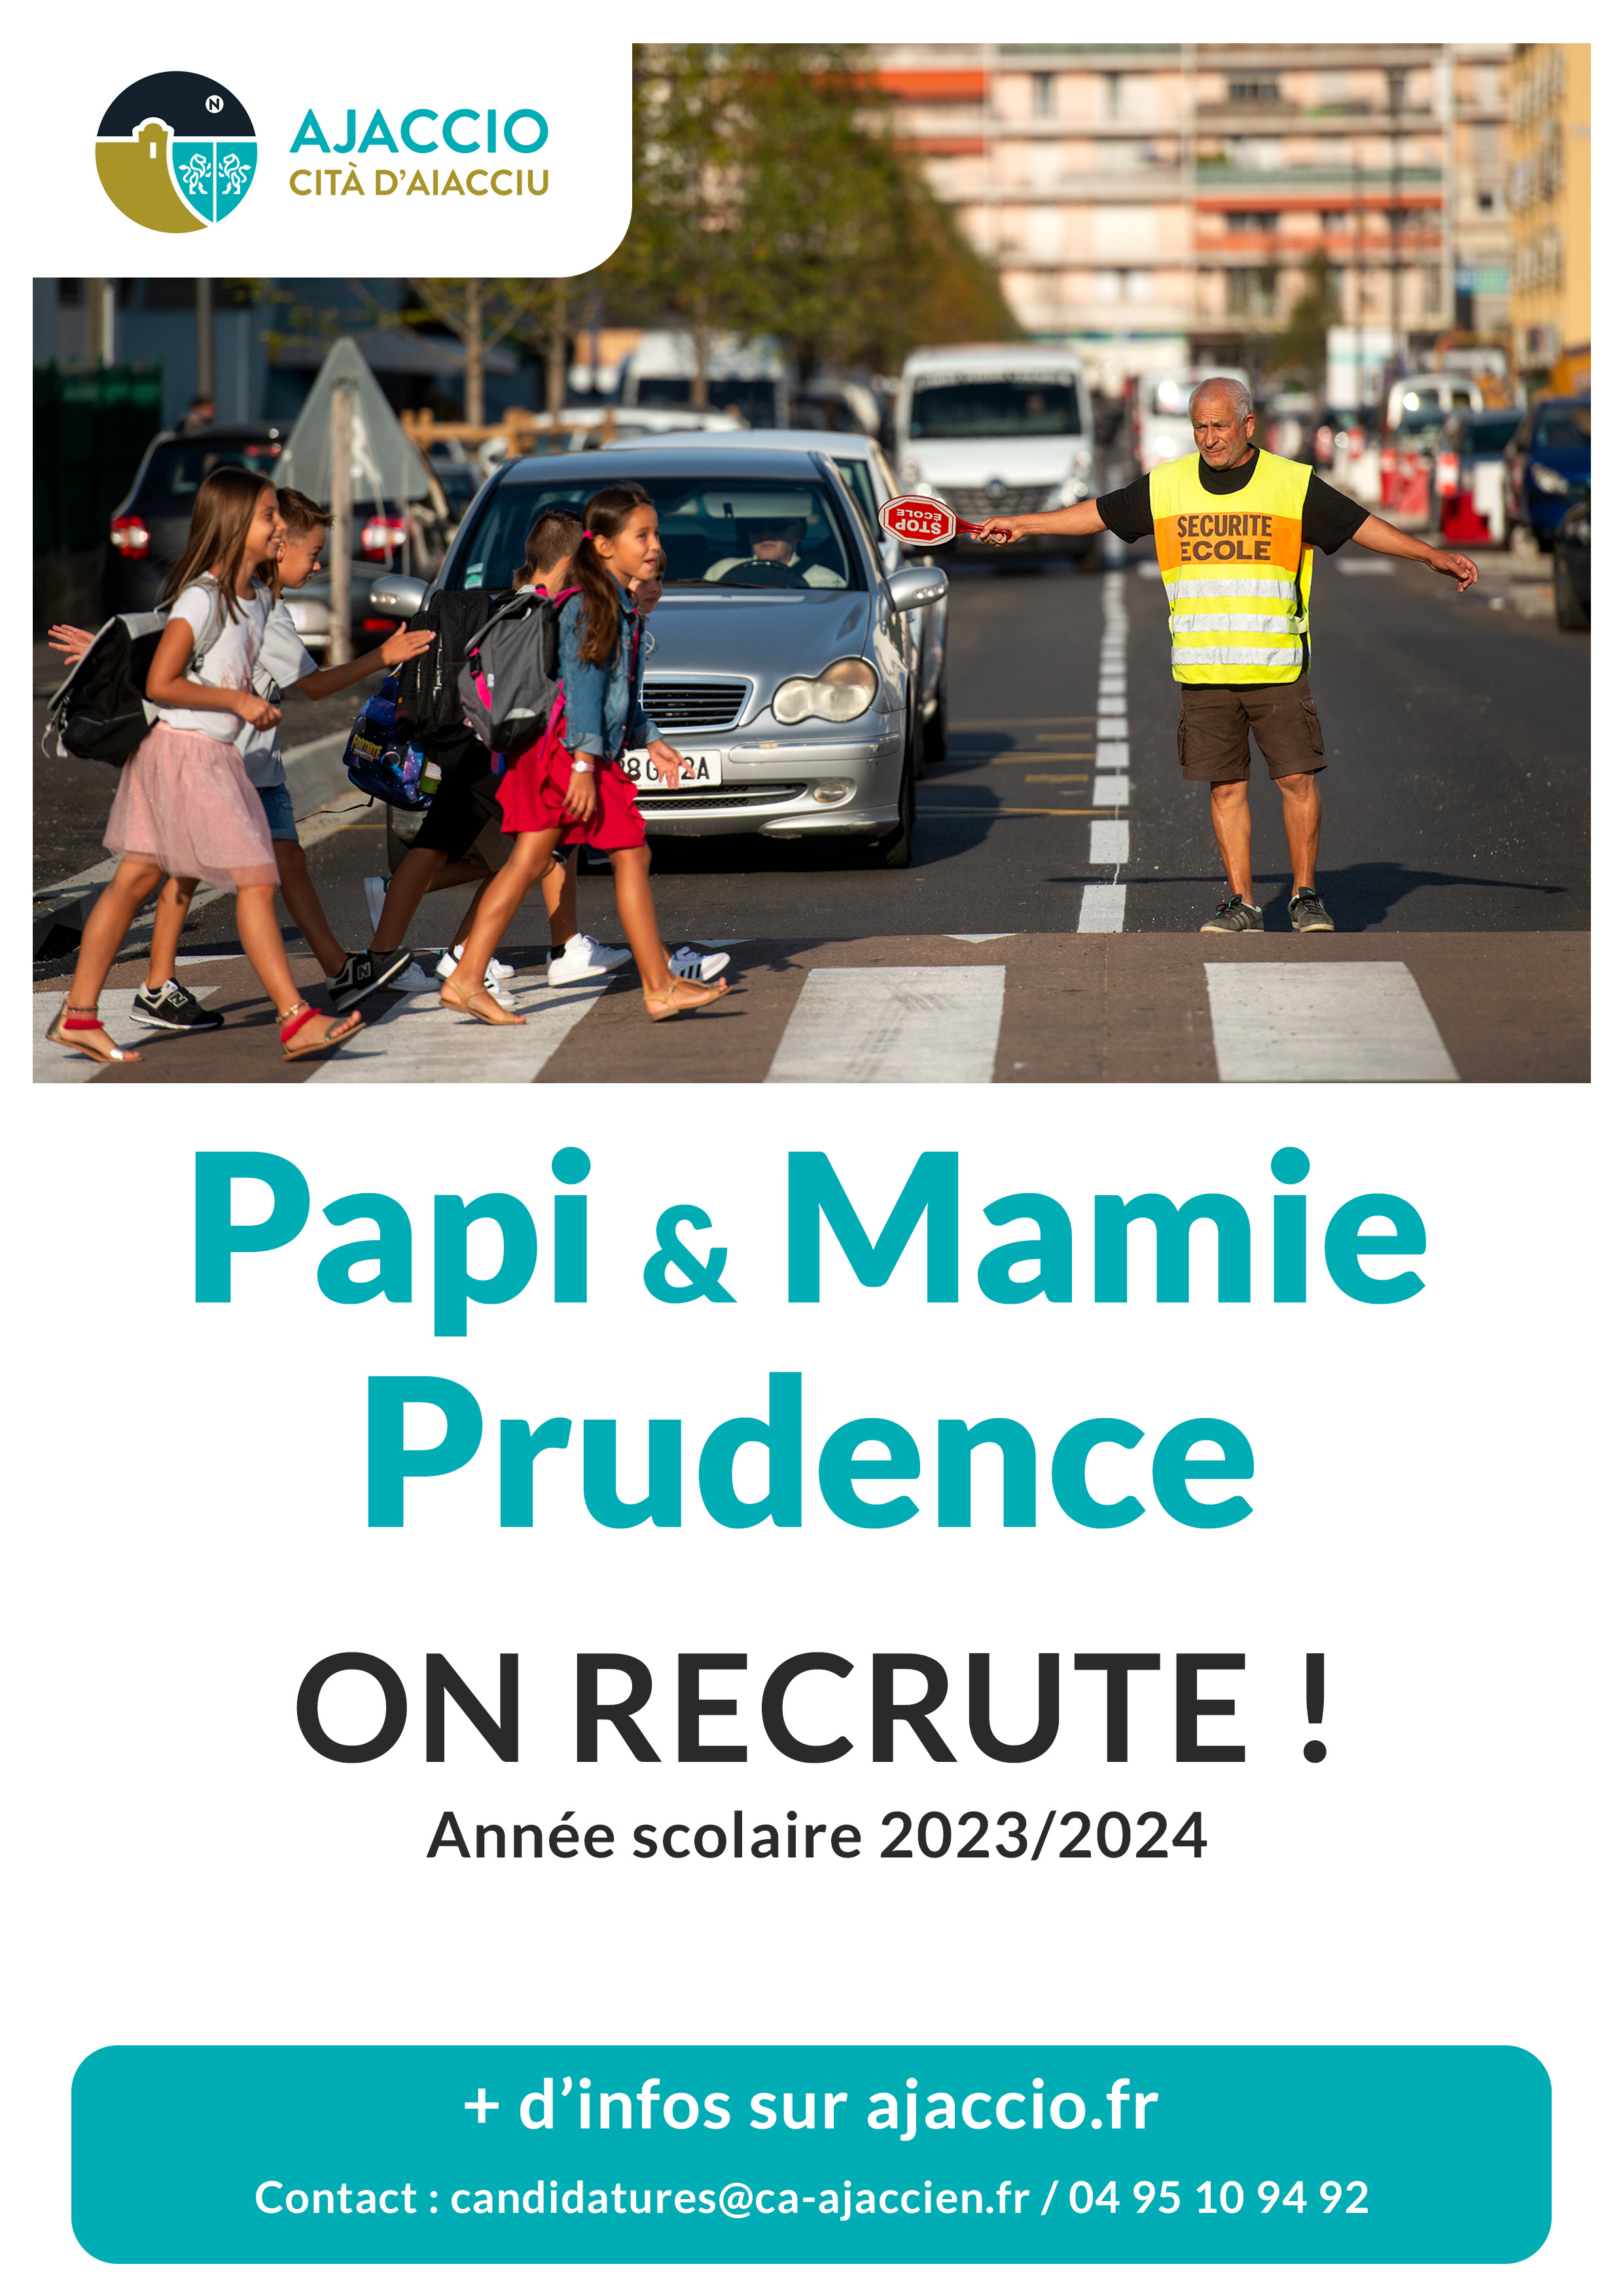 Papi & Mamie Prudence, on recrute !